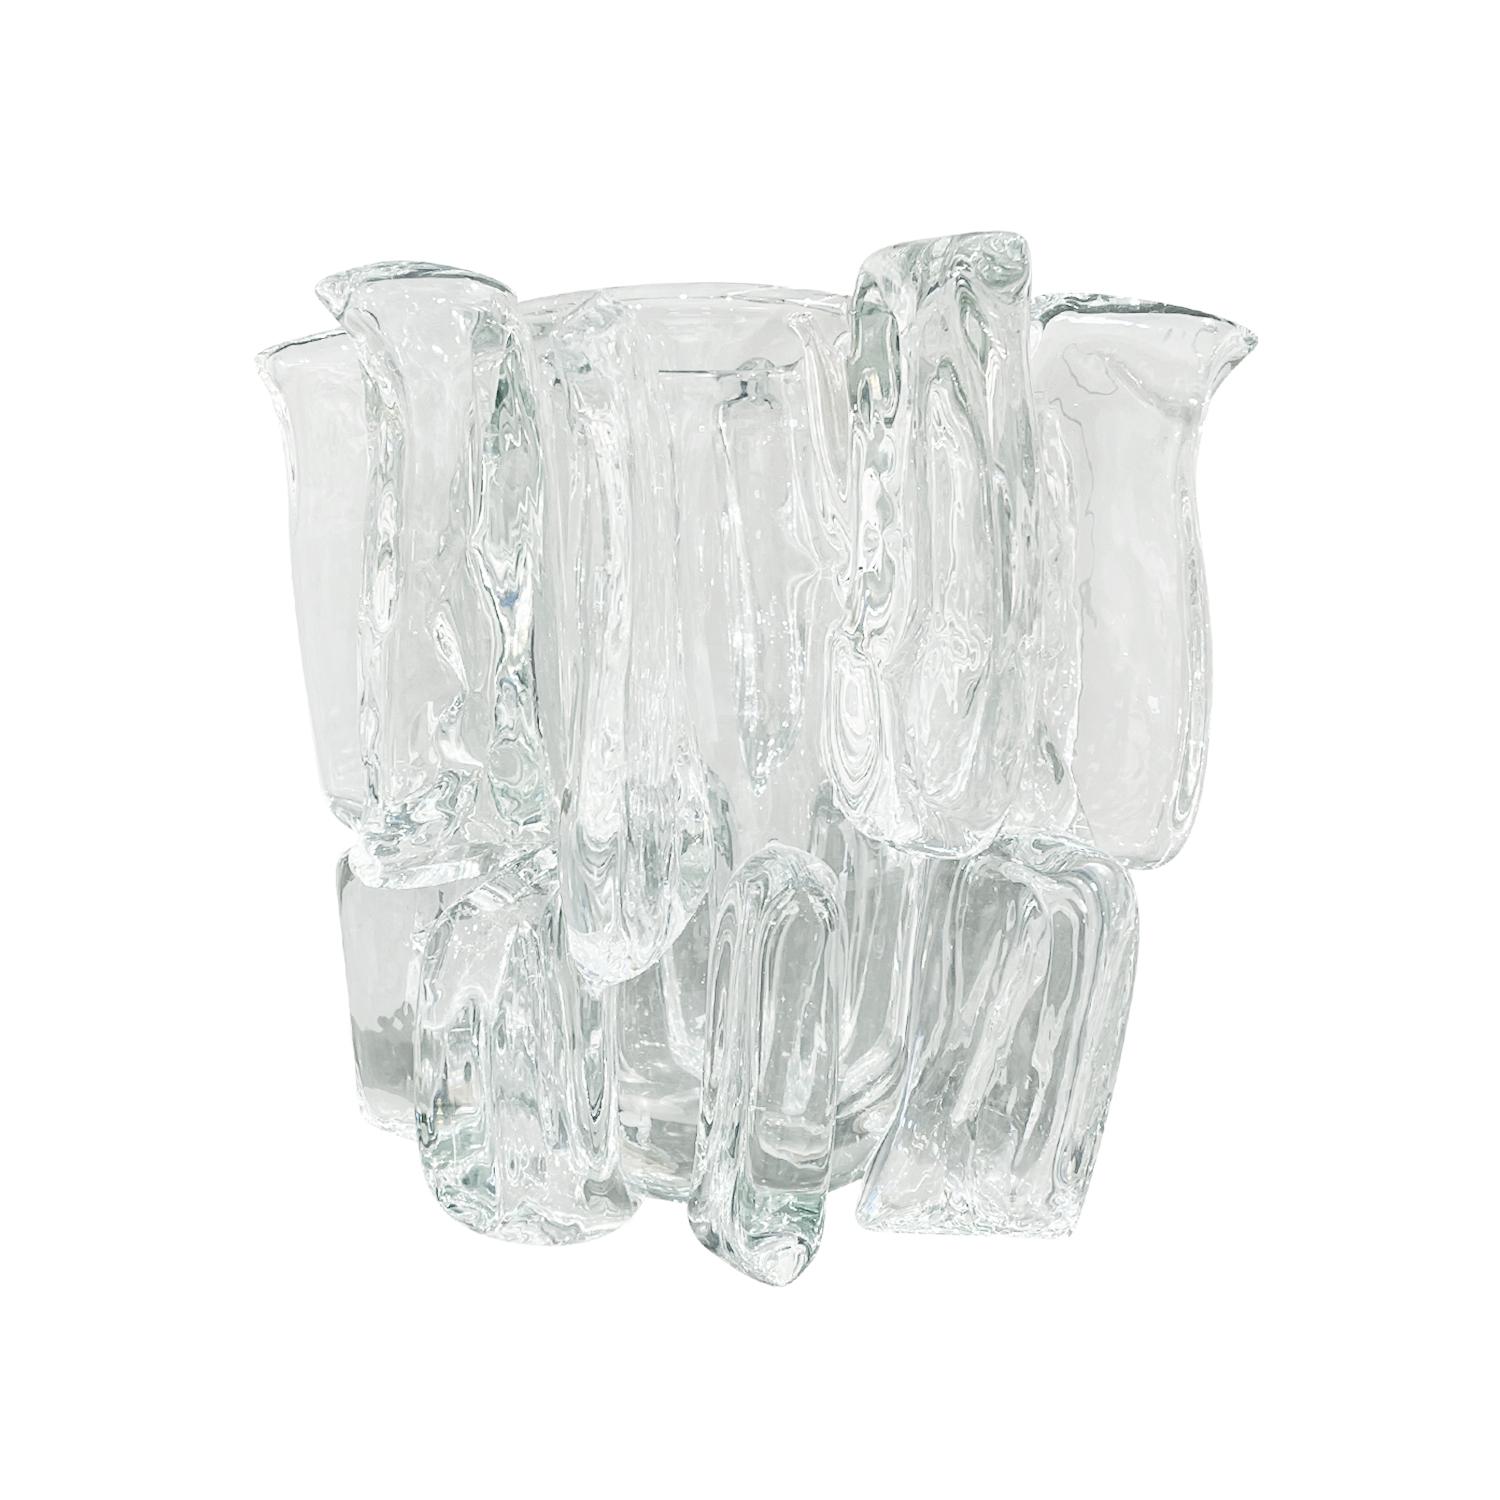 Hand-Crafted 21st Century Clear German Sculptural Art Glass Vase, Décor by Martin Potsch For Sale